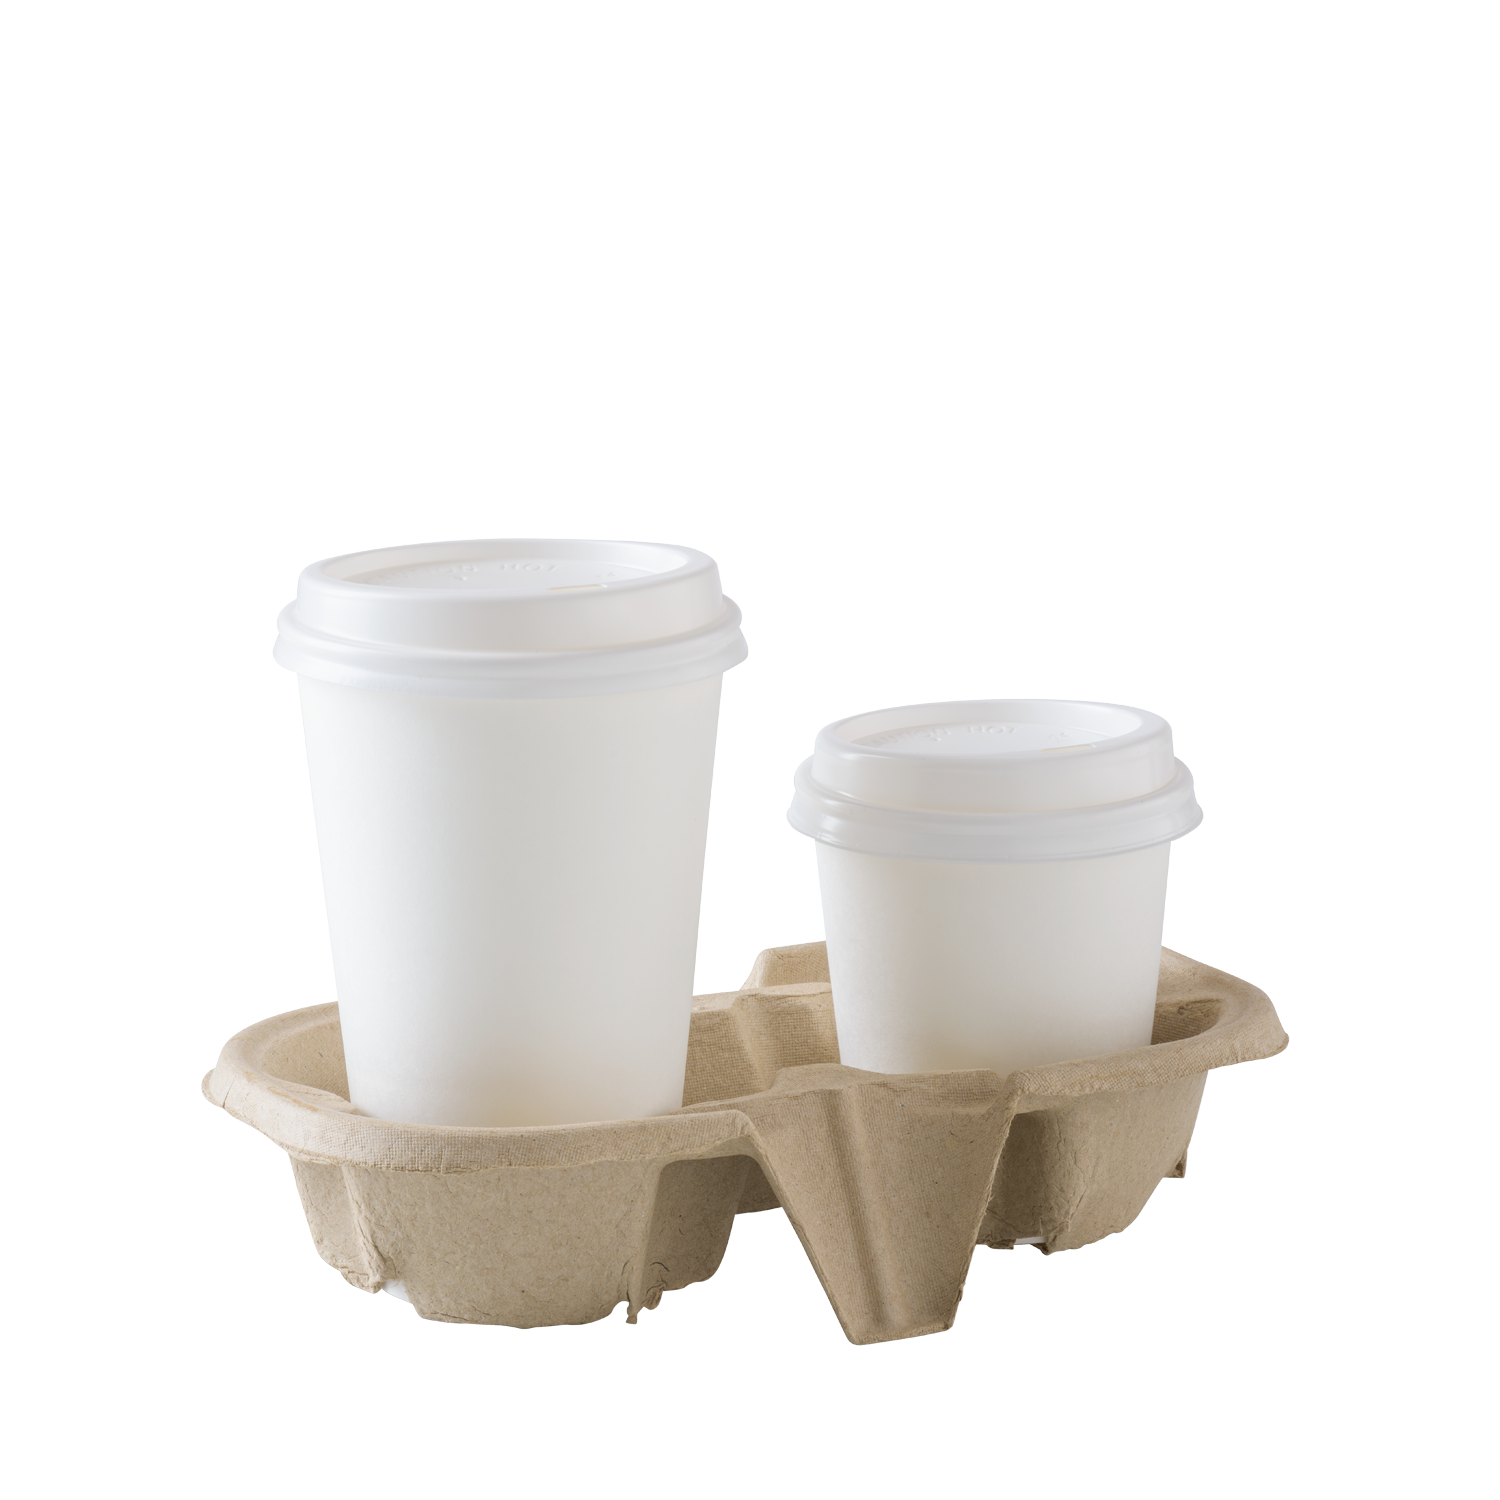 32oz Latte Super Sturdy Biodegradable 4 Cup Drink Carrier 25pk Tea or Soda Cups Compostable Cardboard Coffee and Beverage Caddy for Hot and Cold Drinks Disposable Pulp Fiber Trays to Handle Large 